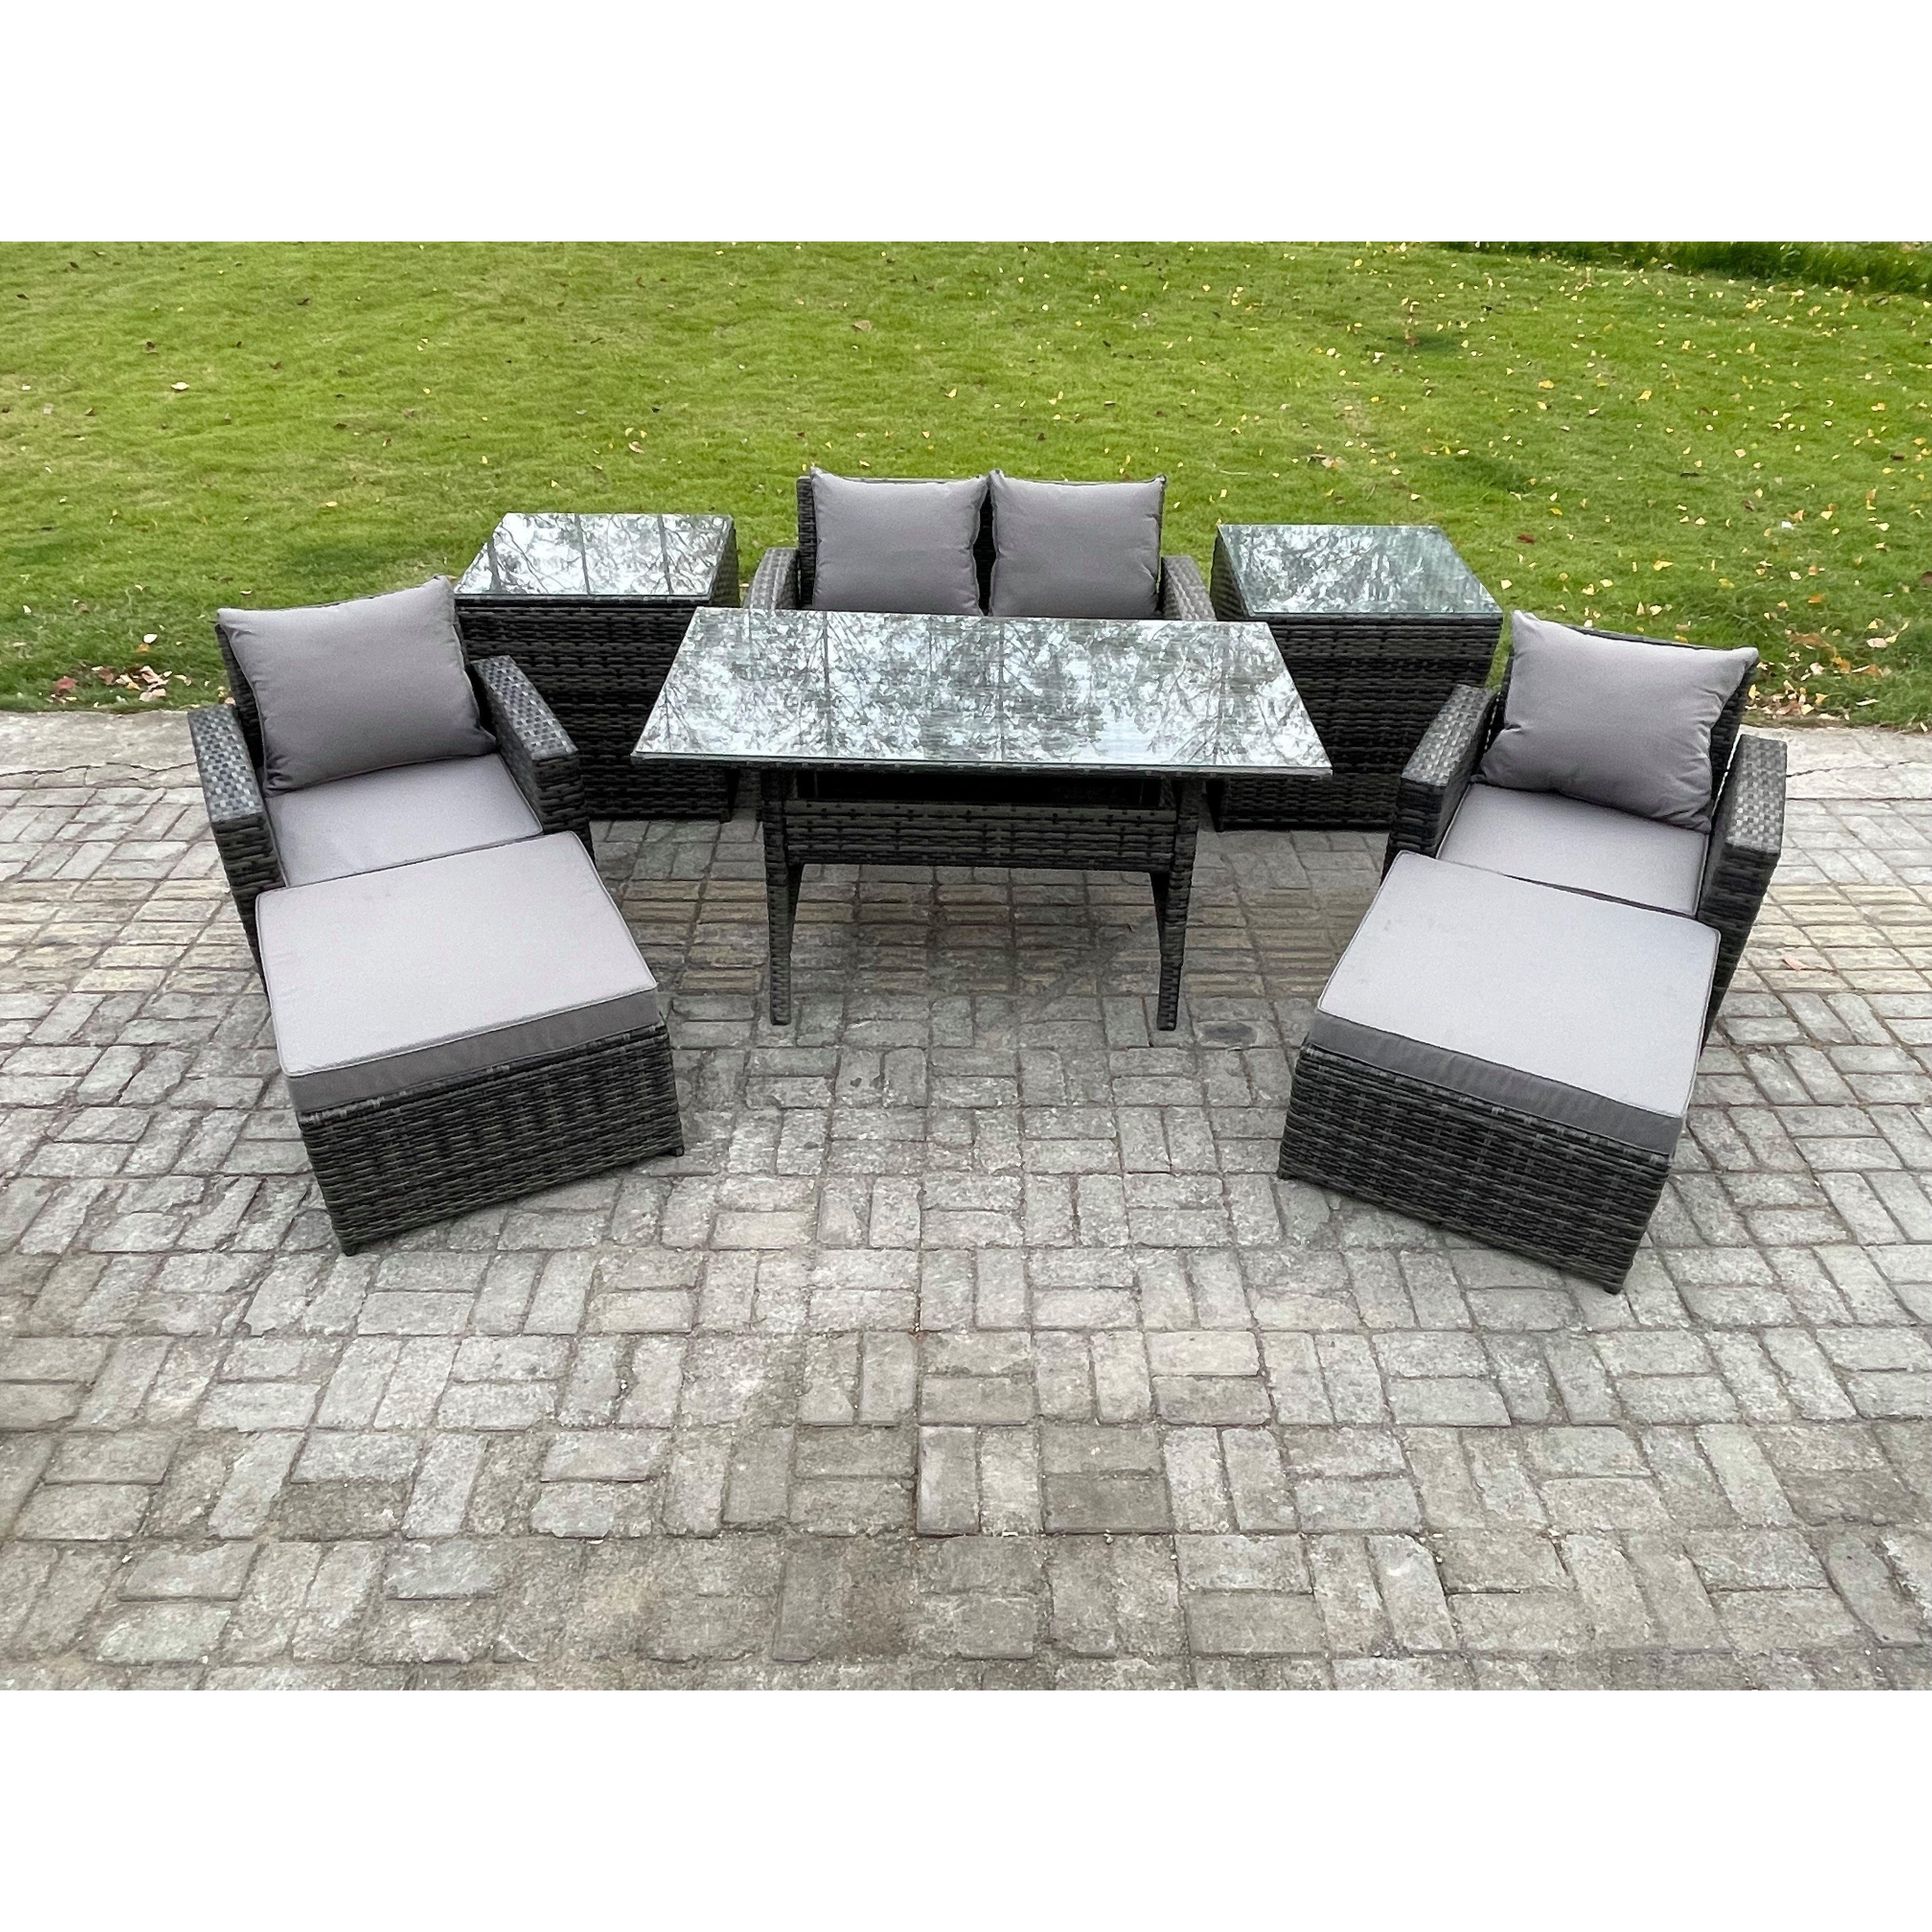 Outdoor Lounge Sofa Garden Furniture Set Rattan Rectangular Dining Table with Double Seat Sofa Armchair 2 Side Tables - image 1